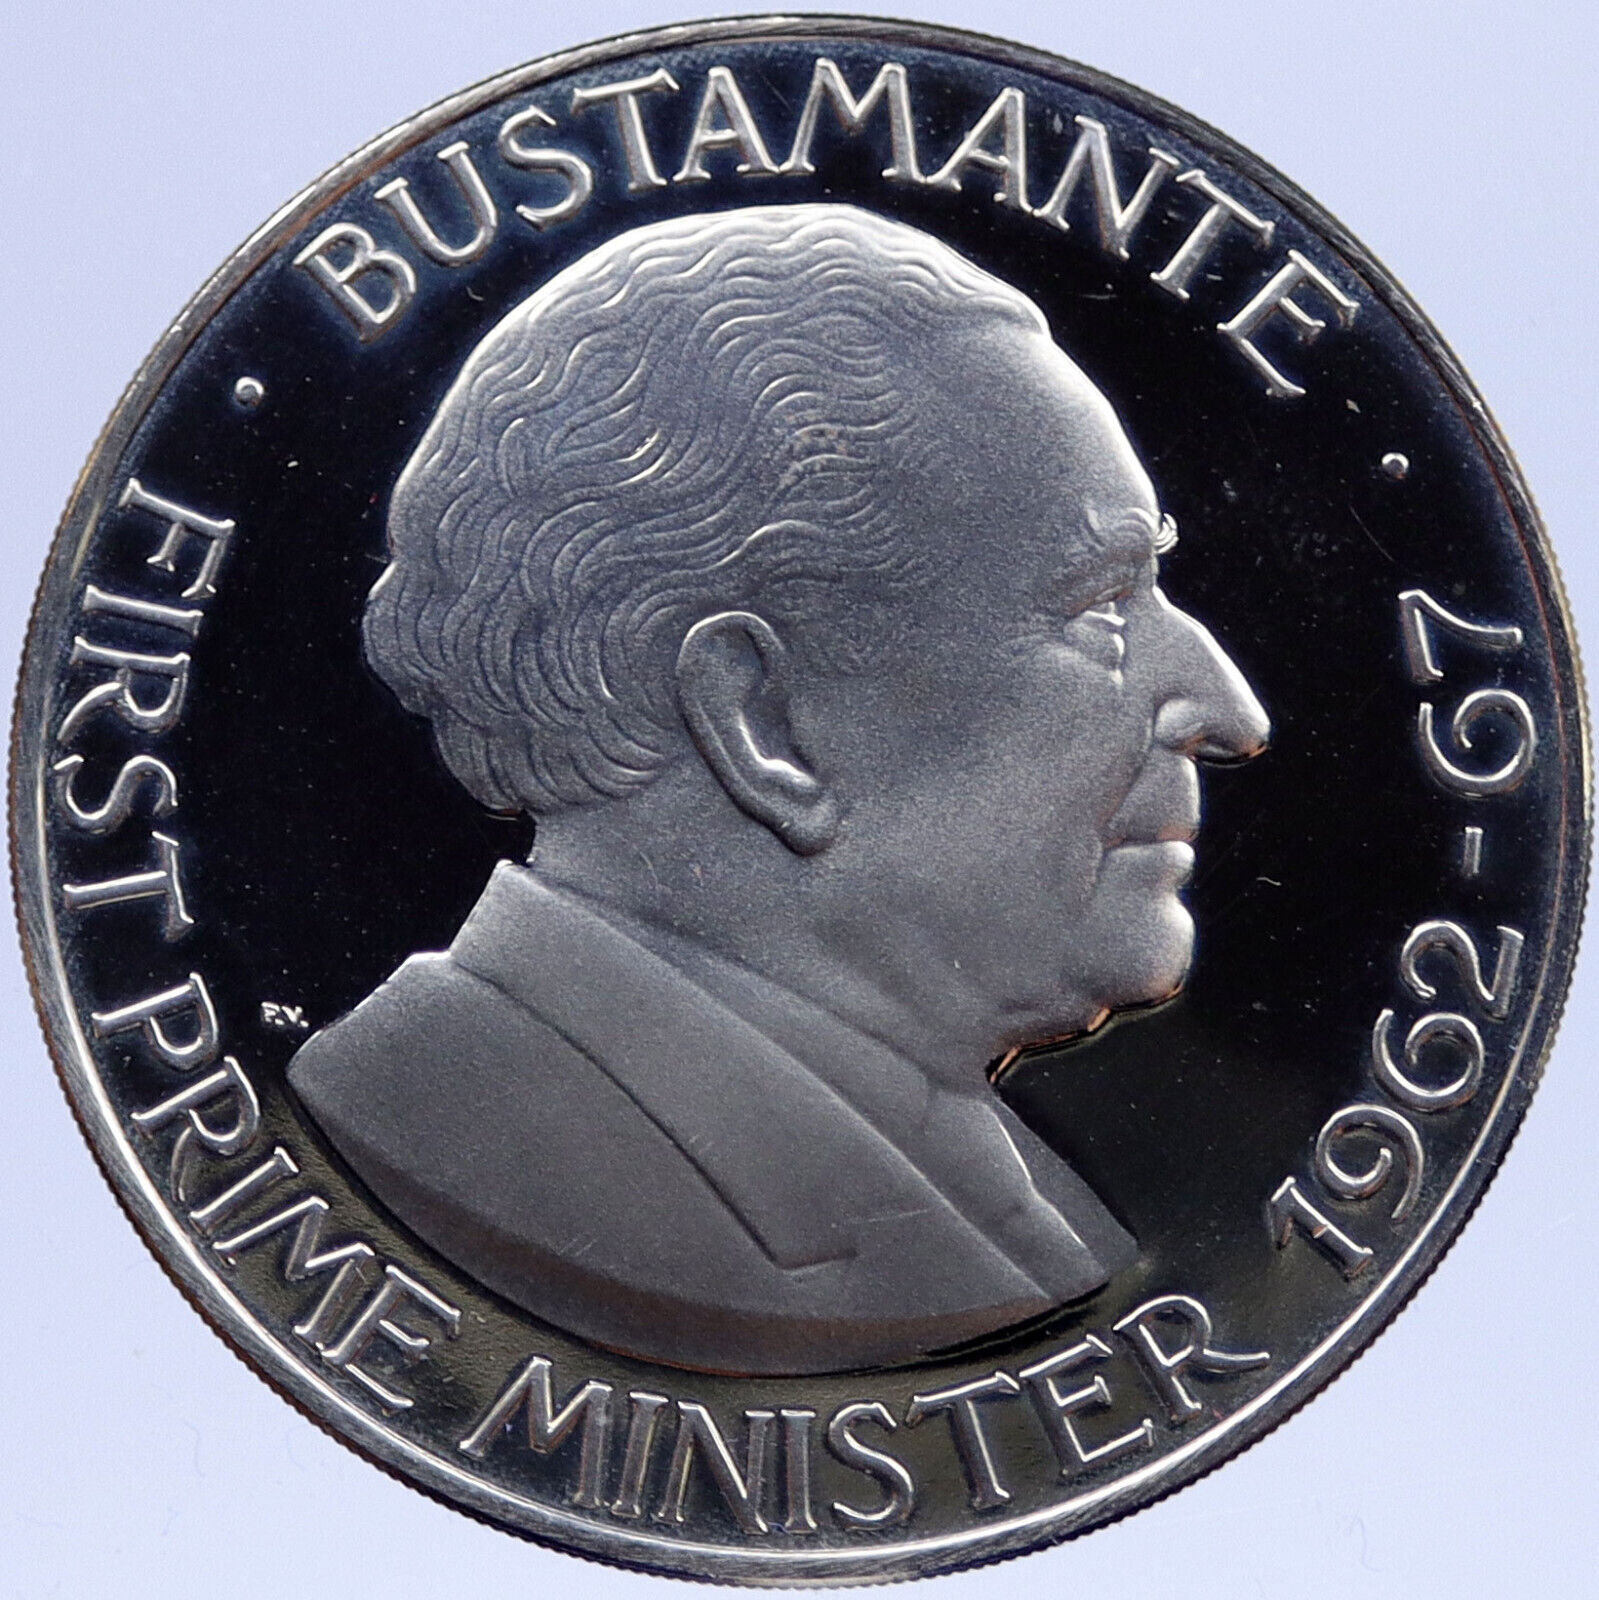 1972 JAMAICA First Prime Minister BUSTAMANTE Vintage Proof Dollar Coin i117775